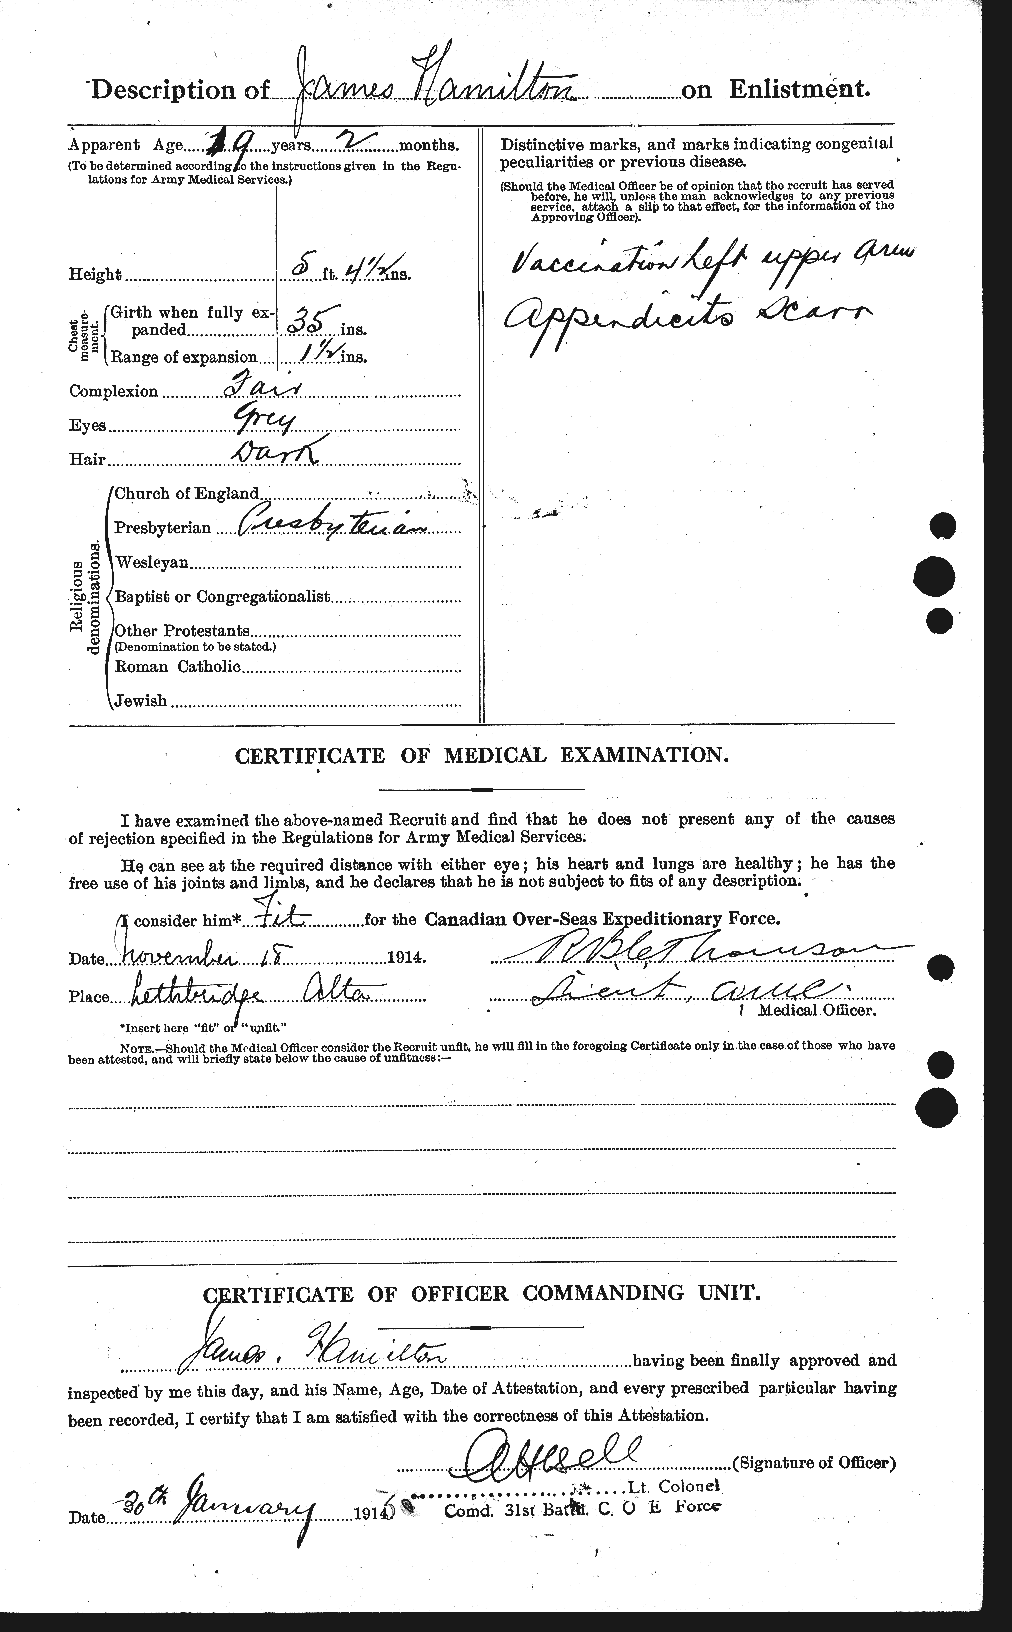 Personnel Records of the First World War - CEF 372960b